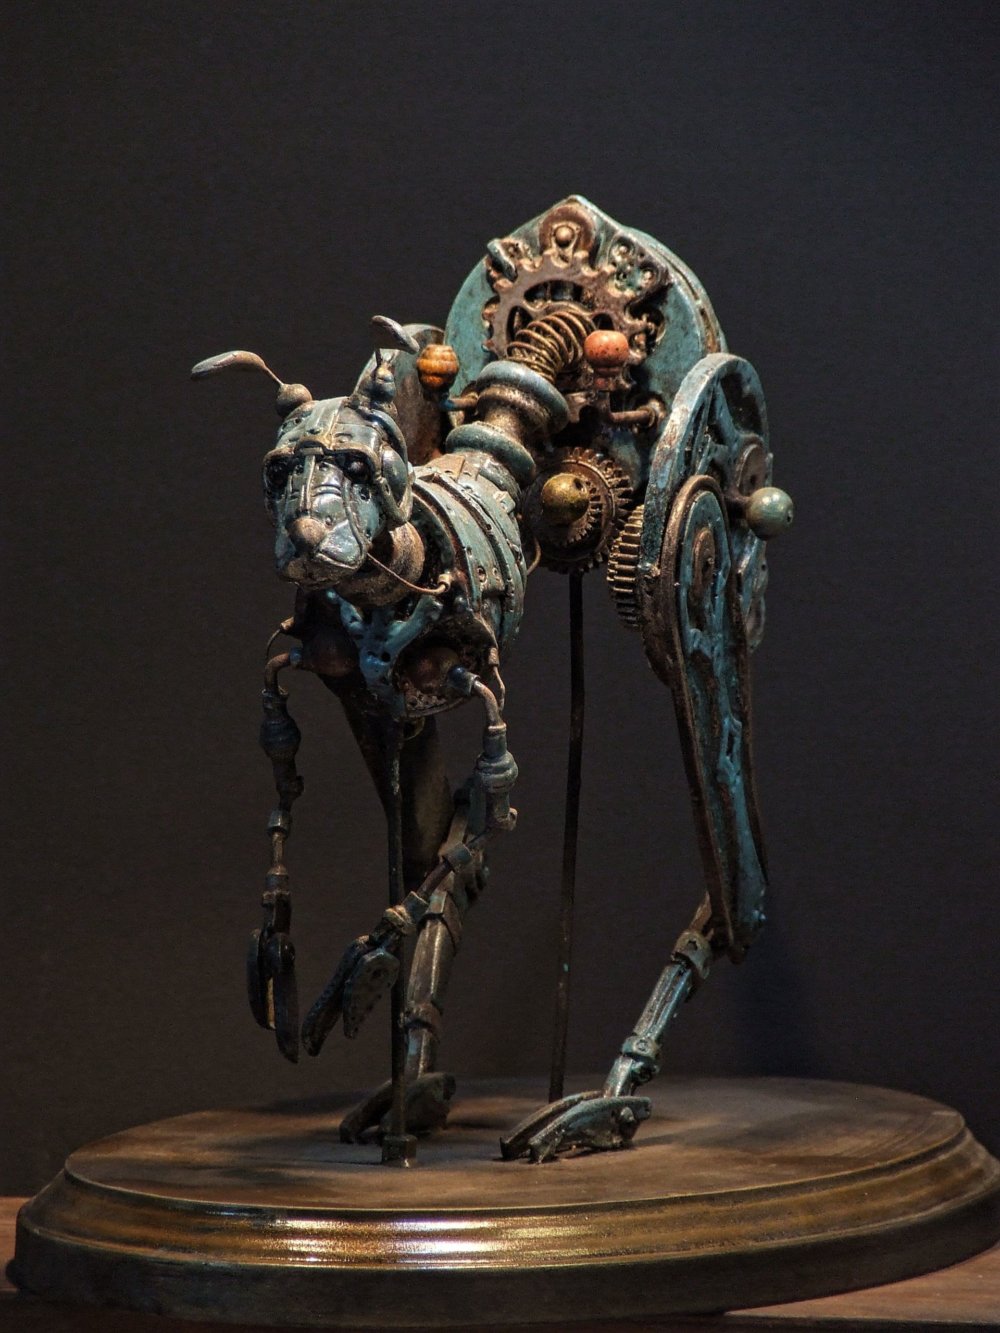 Relics Of The Future Futuristic Steampunk Resin Sculptures By Tomas Barcelo 9